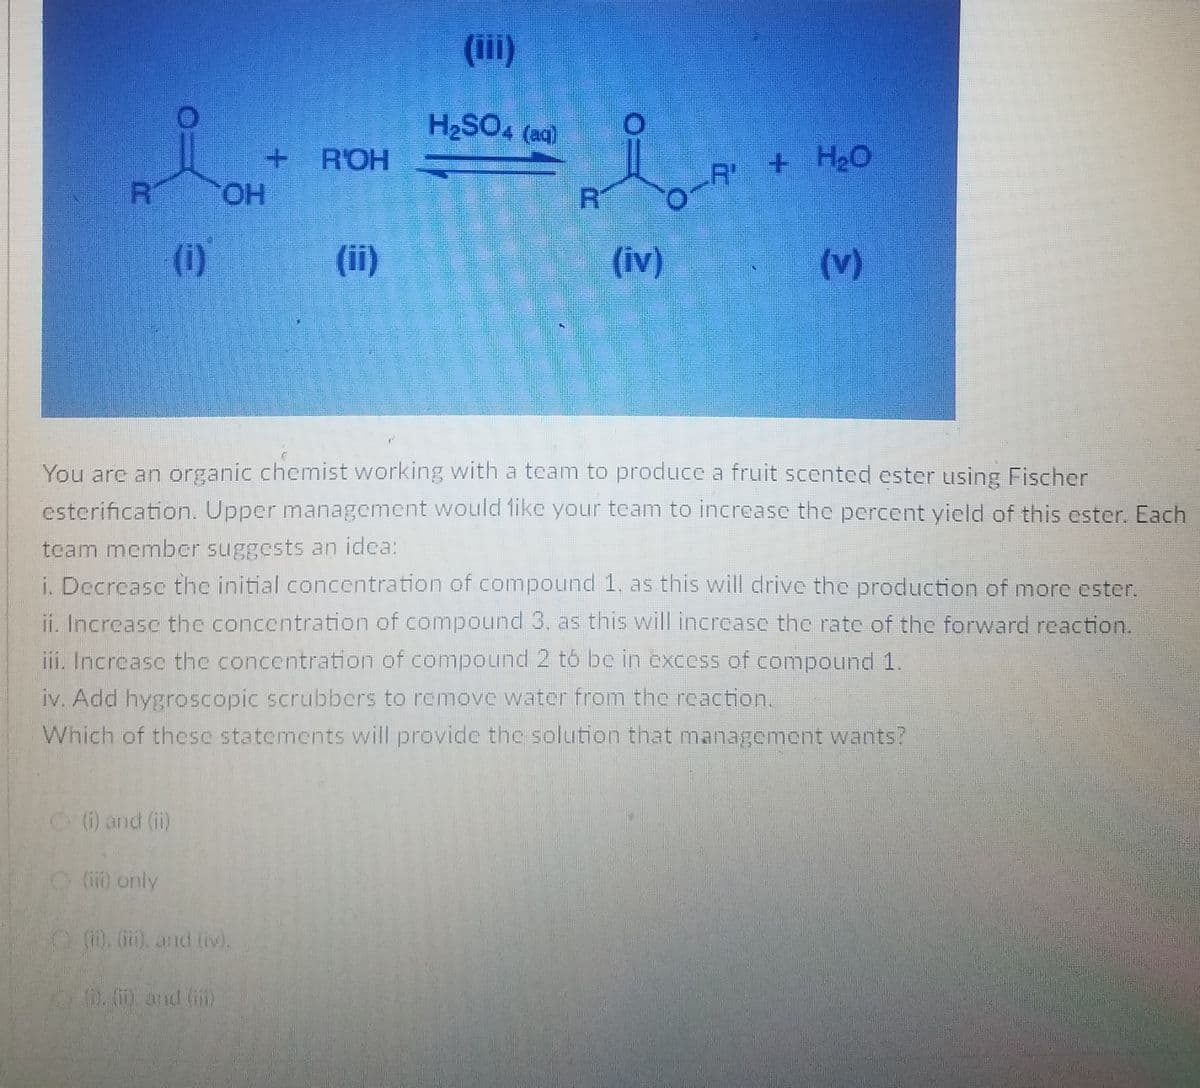 (ii)
H2SO4 (aq)
R'OH
R +HO
R
CHO.
R
(i)
(ii)
(iv)
(v)
You are an organic chemist working with a team to produce a fruit scented ester using Fischer
esterification. Upper management would 1ike your team to increasc the percent yield of this ester. Each
team member suggests an idca:
i. Decrease thc initial concentration of compound 1. as this will drive the production of more ester.
ii. Increasc thc concentration of compound 3. as this will increase the rate of the forward reaction.
iji, Increasc the concentration of compound 2 t5 be in excess of compound 1.
iv. Add hygroscopic scrubbers to remove water from the reaction.
Which of thesc statcments will provide the solution that management wants?
(i) and (i)
(ii) only
). (), and (iv).
20. m.and (i)
